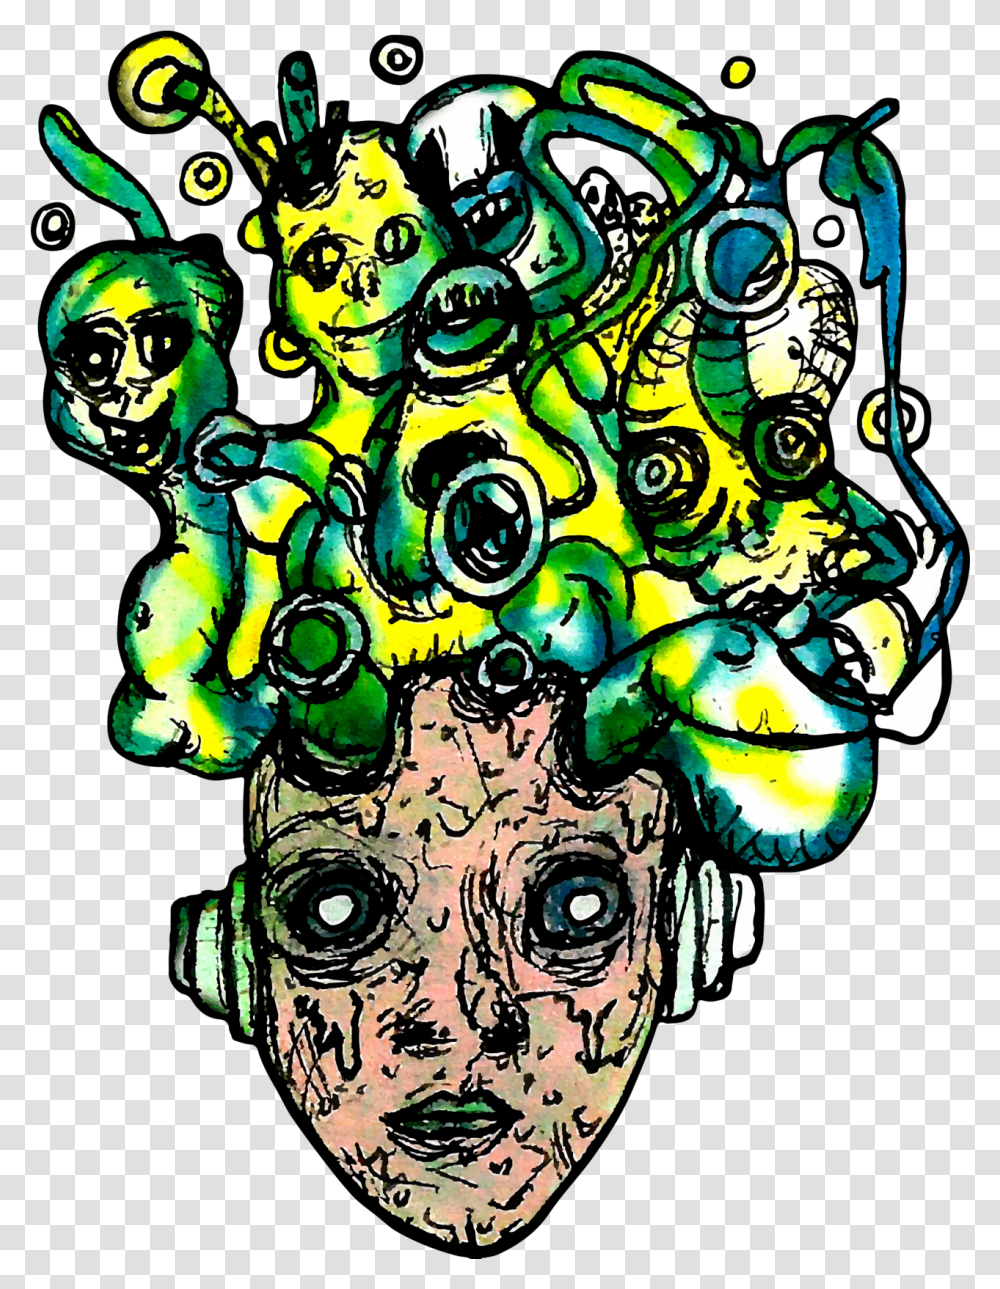 Psychedelic Trippy Art Tumblr Creepy Trippy, Modern Art, Graphics, Drawing, Doodle Transparent Png